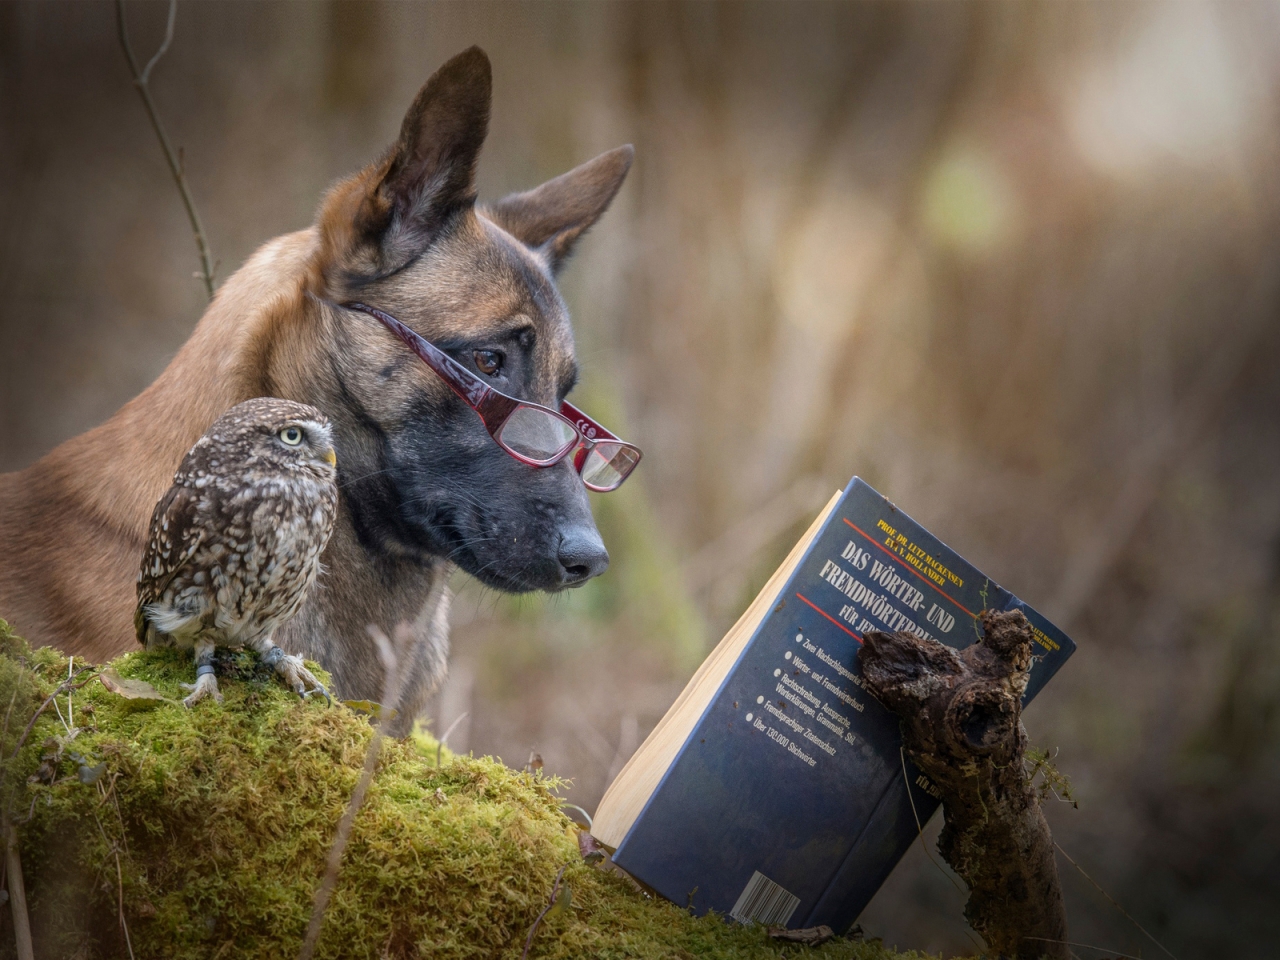 Dog and Owl Reading a Book for 1280 x 960 resolution